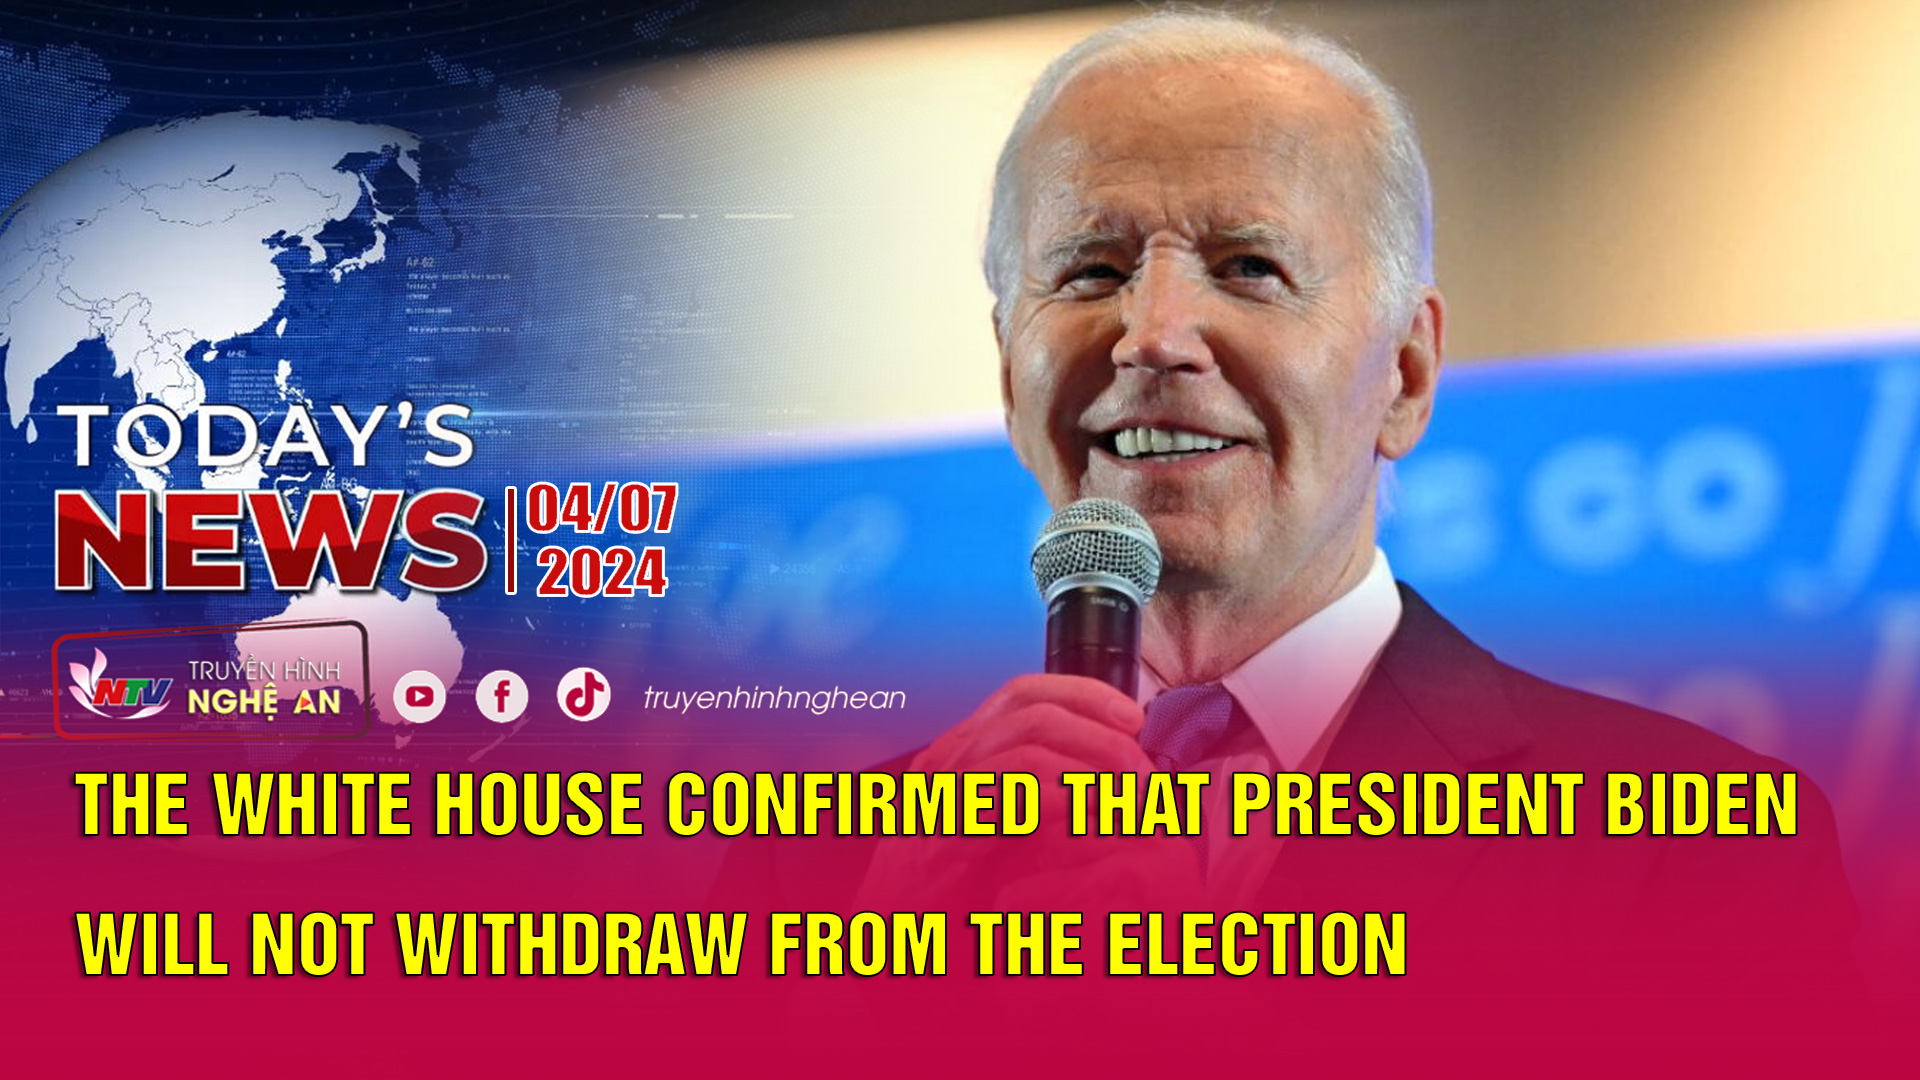 Today's News 04/7/2024: The White House confirmed Biden will not withdraw from election